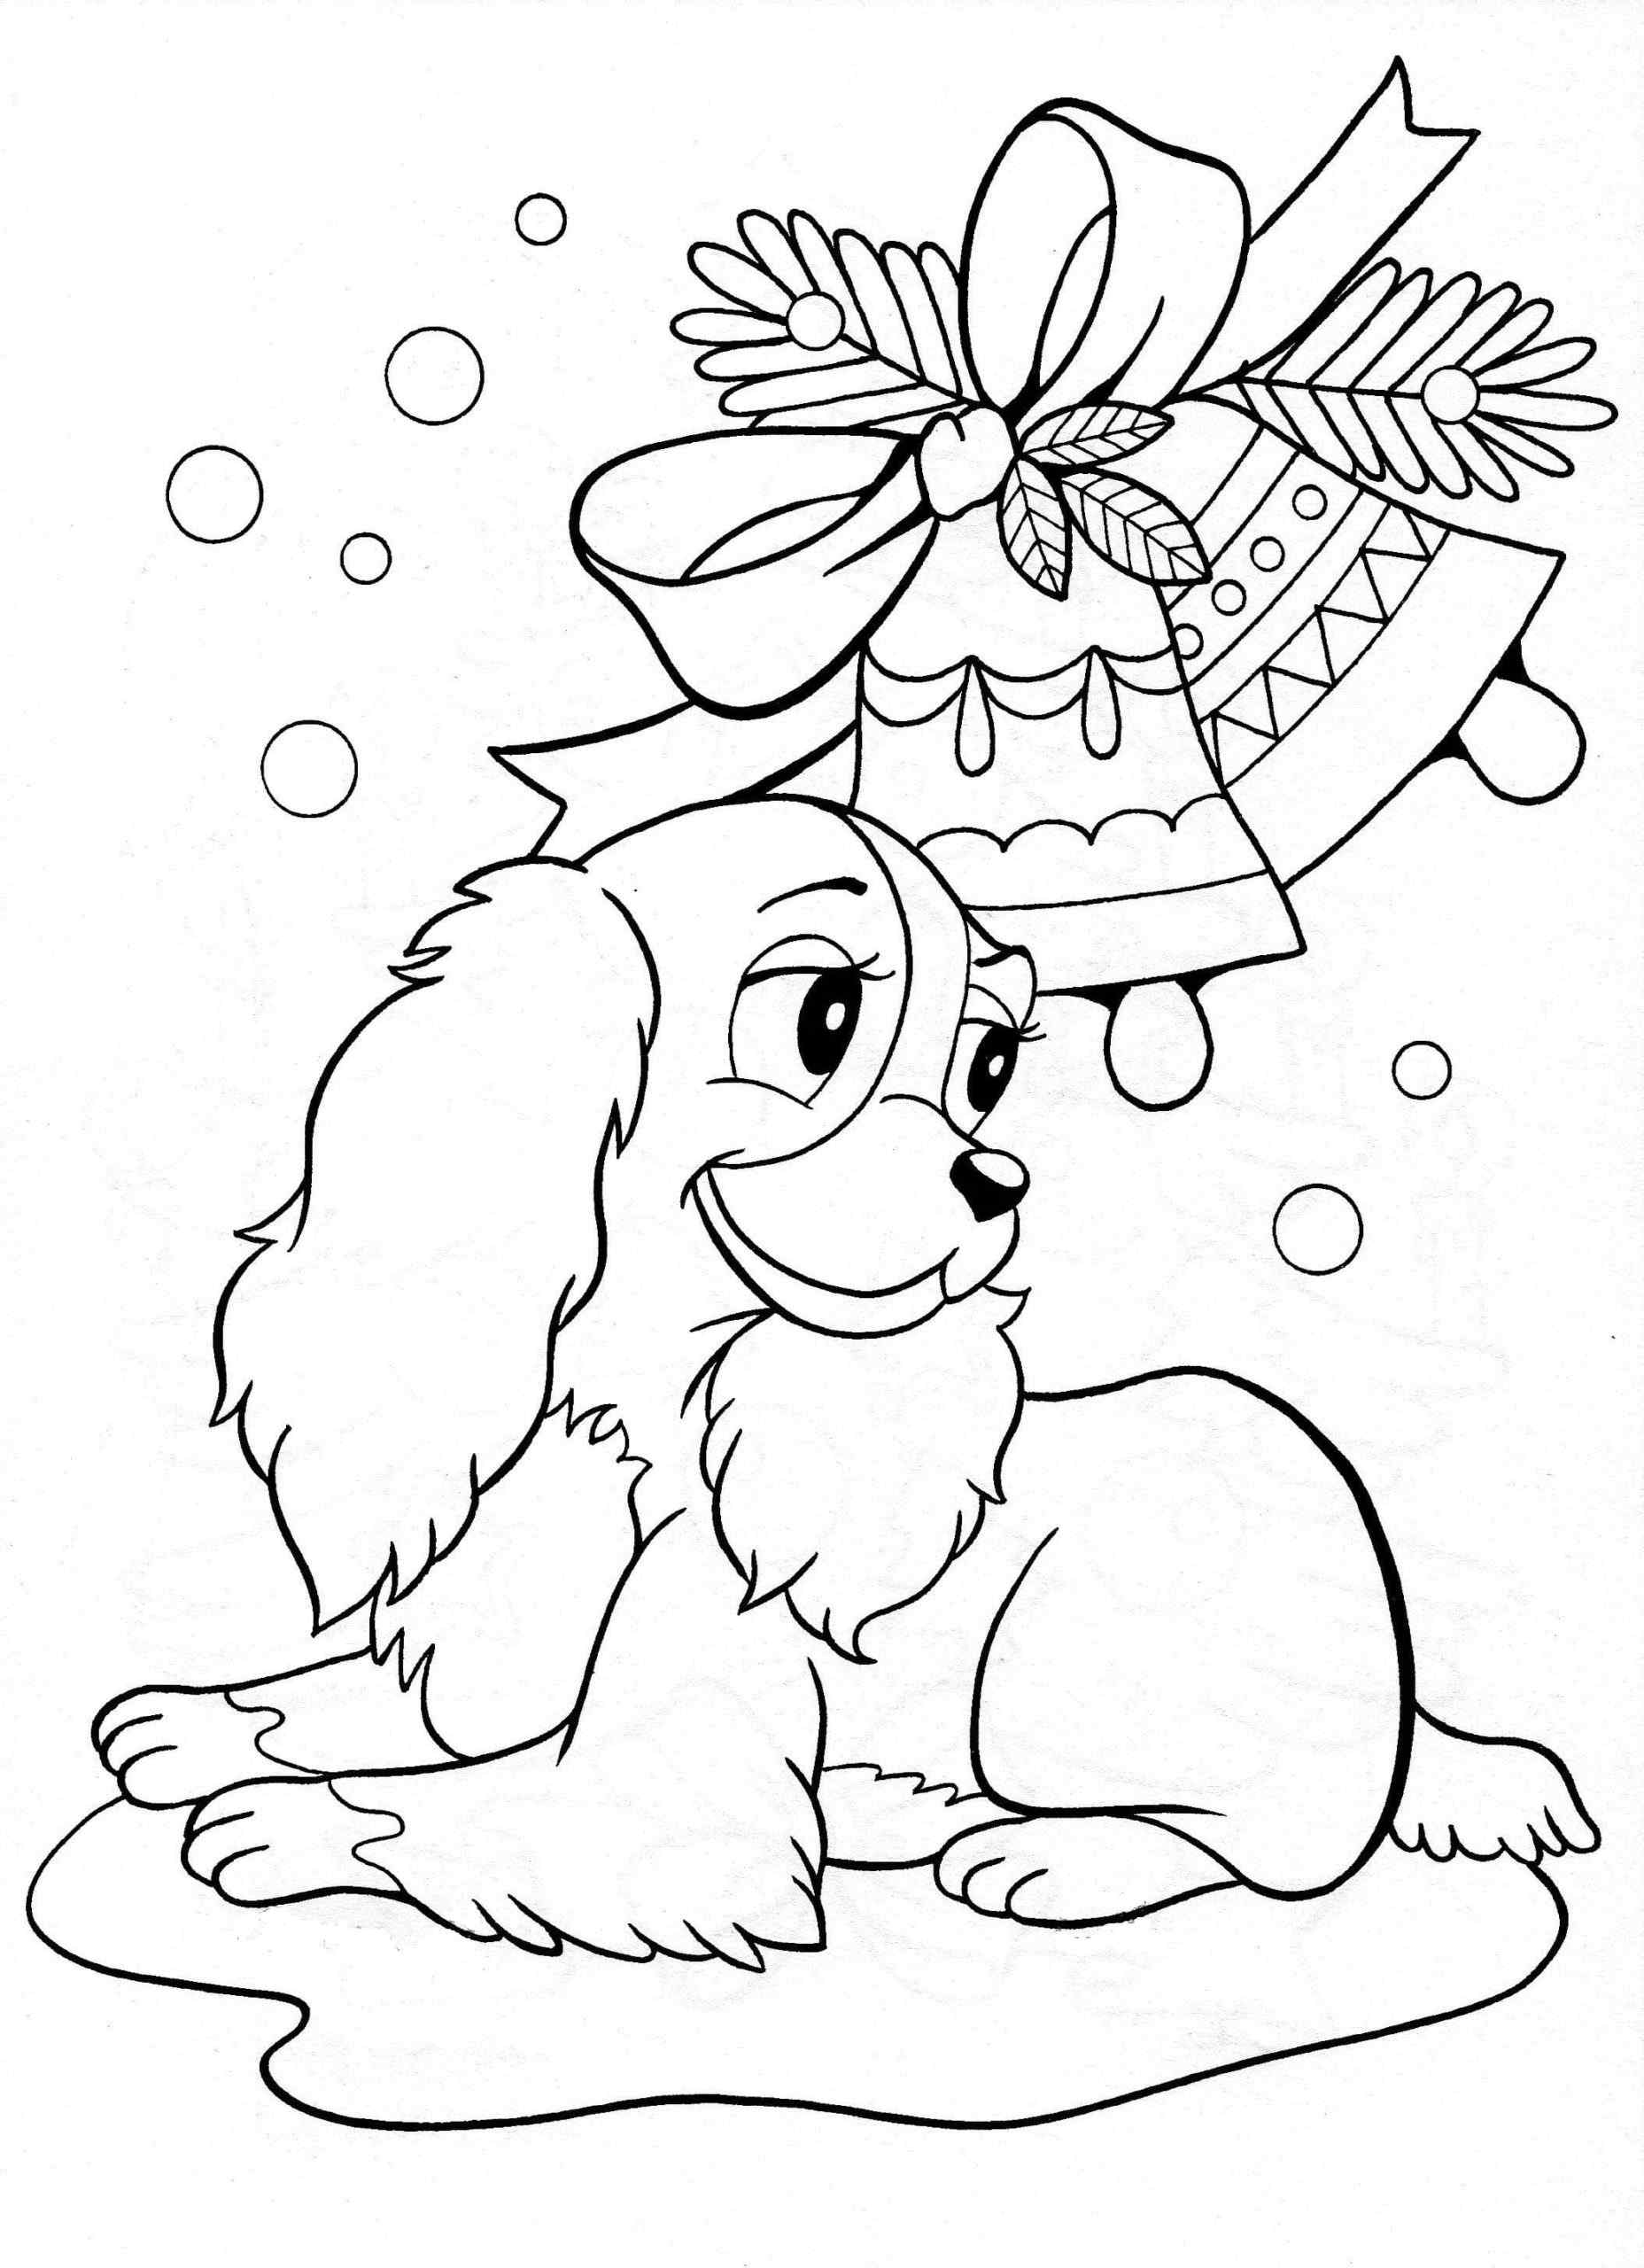 Waiting For Christmas Coloring Page